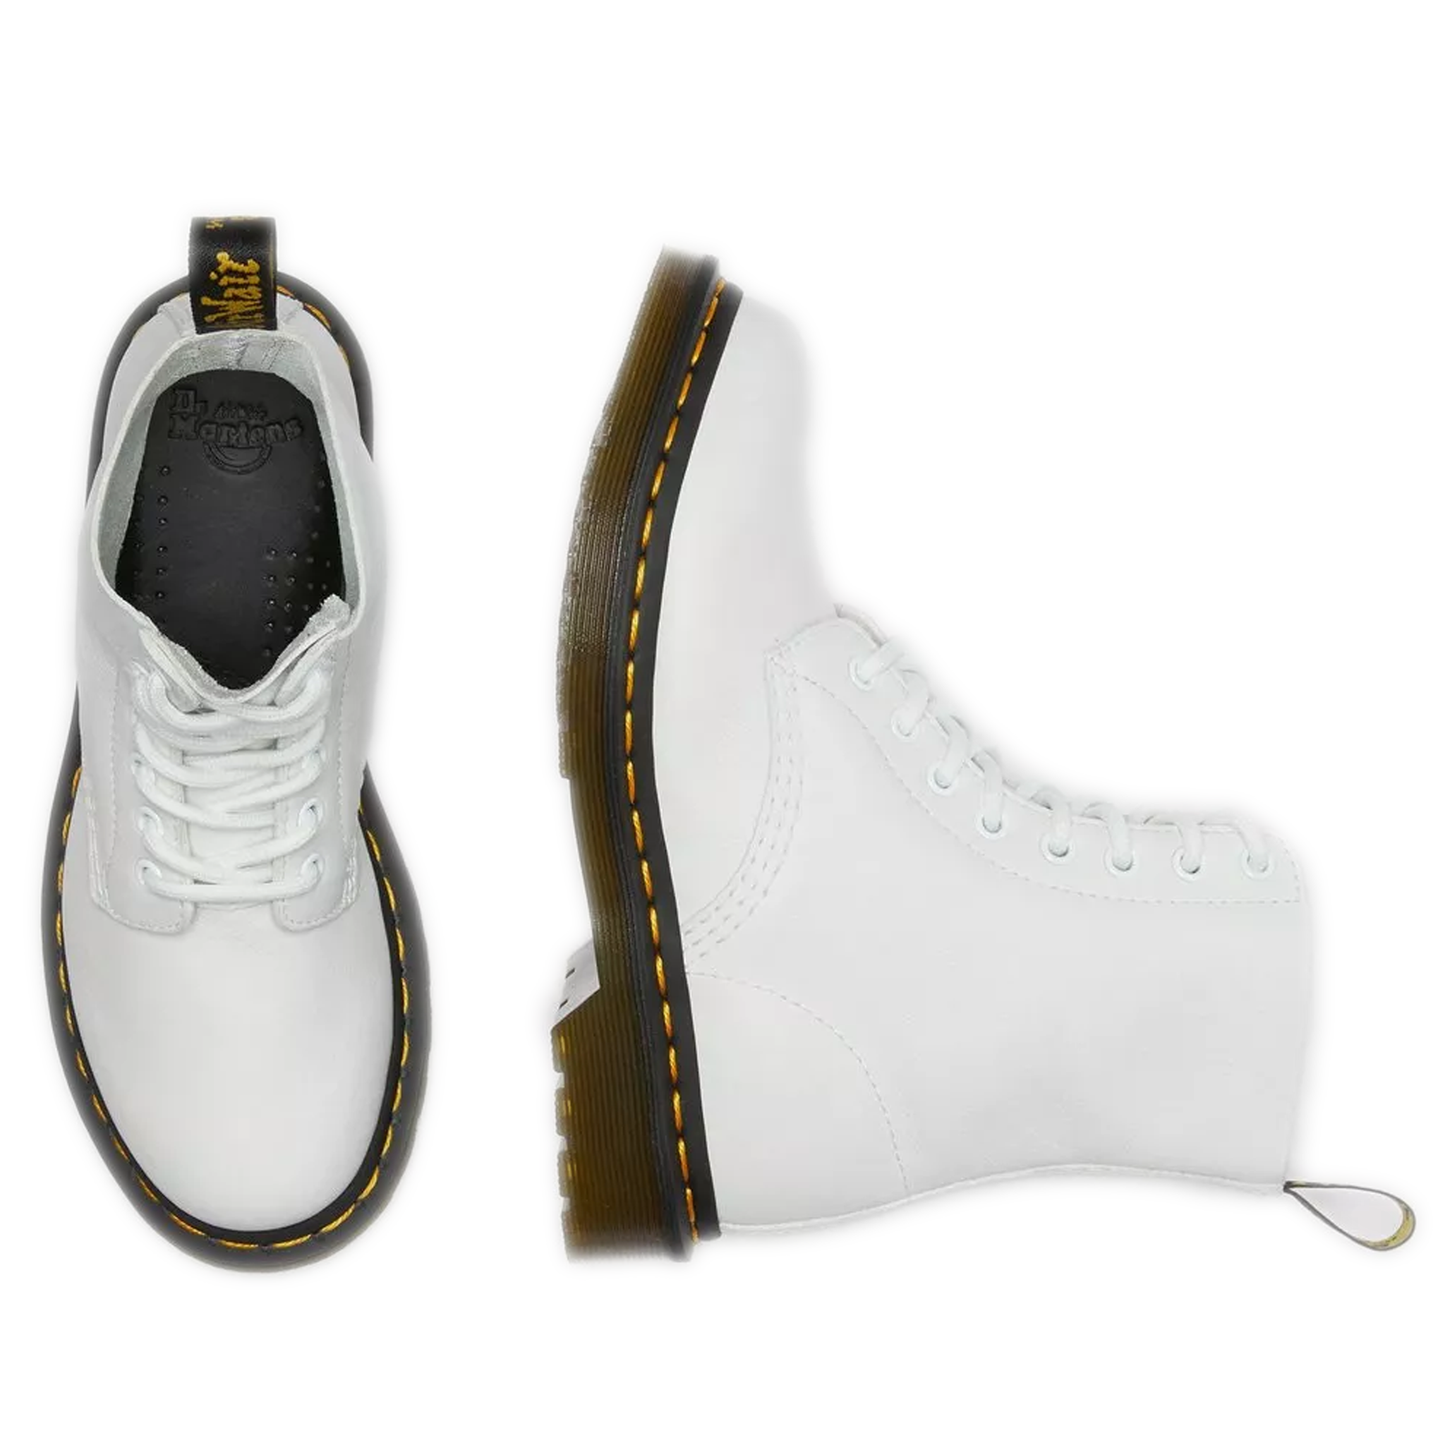 Women's Dr. Martens 1460 Pascal Virginia Leather Boots - White Virginia